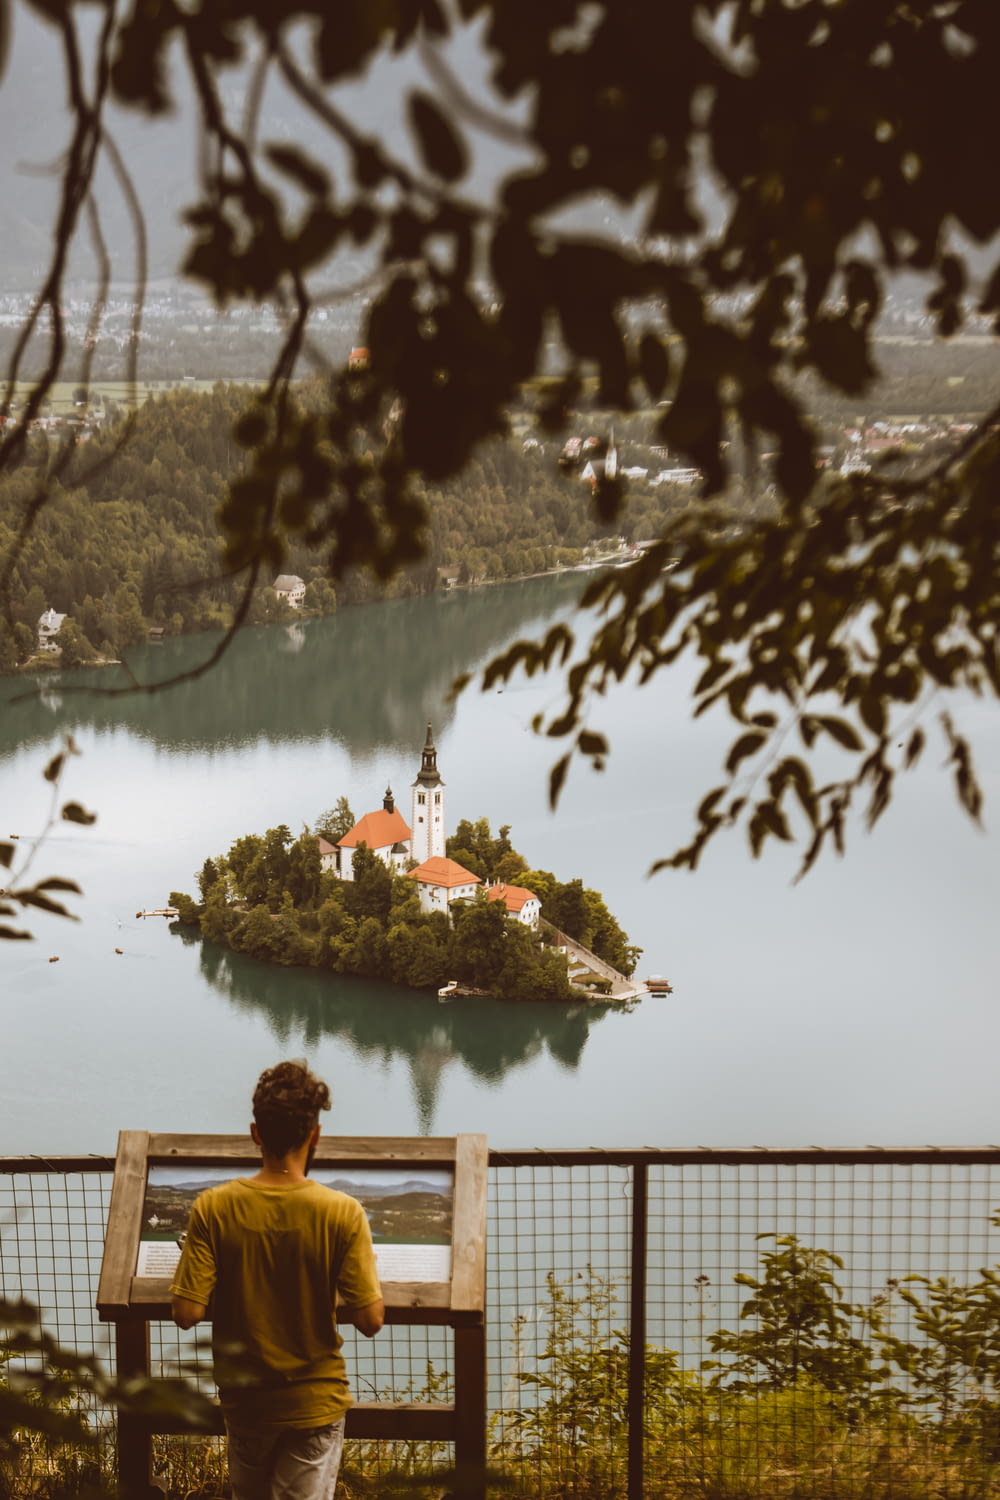 a man sitting on a bench looking at a small island